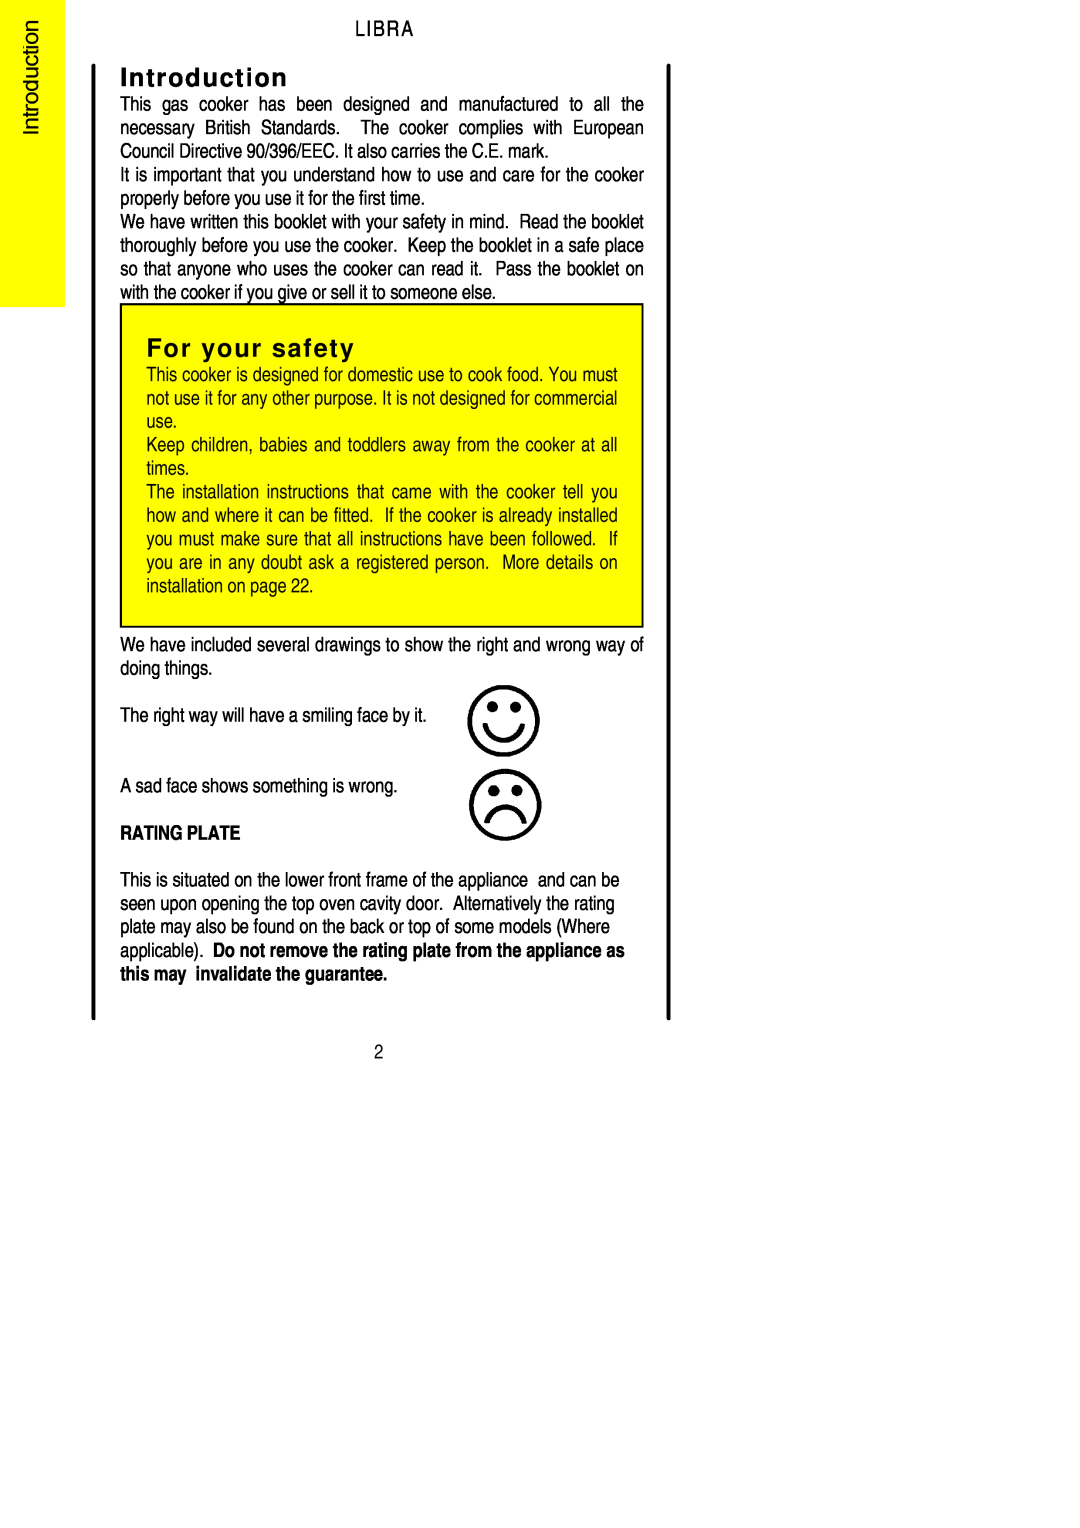 Parkinson Cowan Libra installation instructions Introduction, For your safety, Rating Plate 